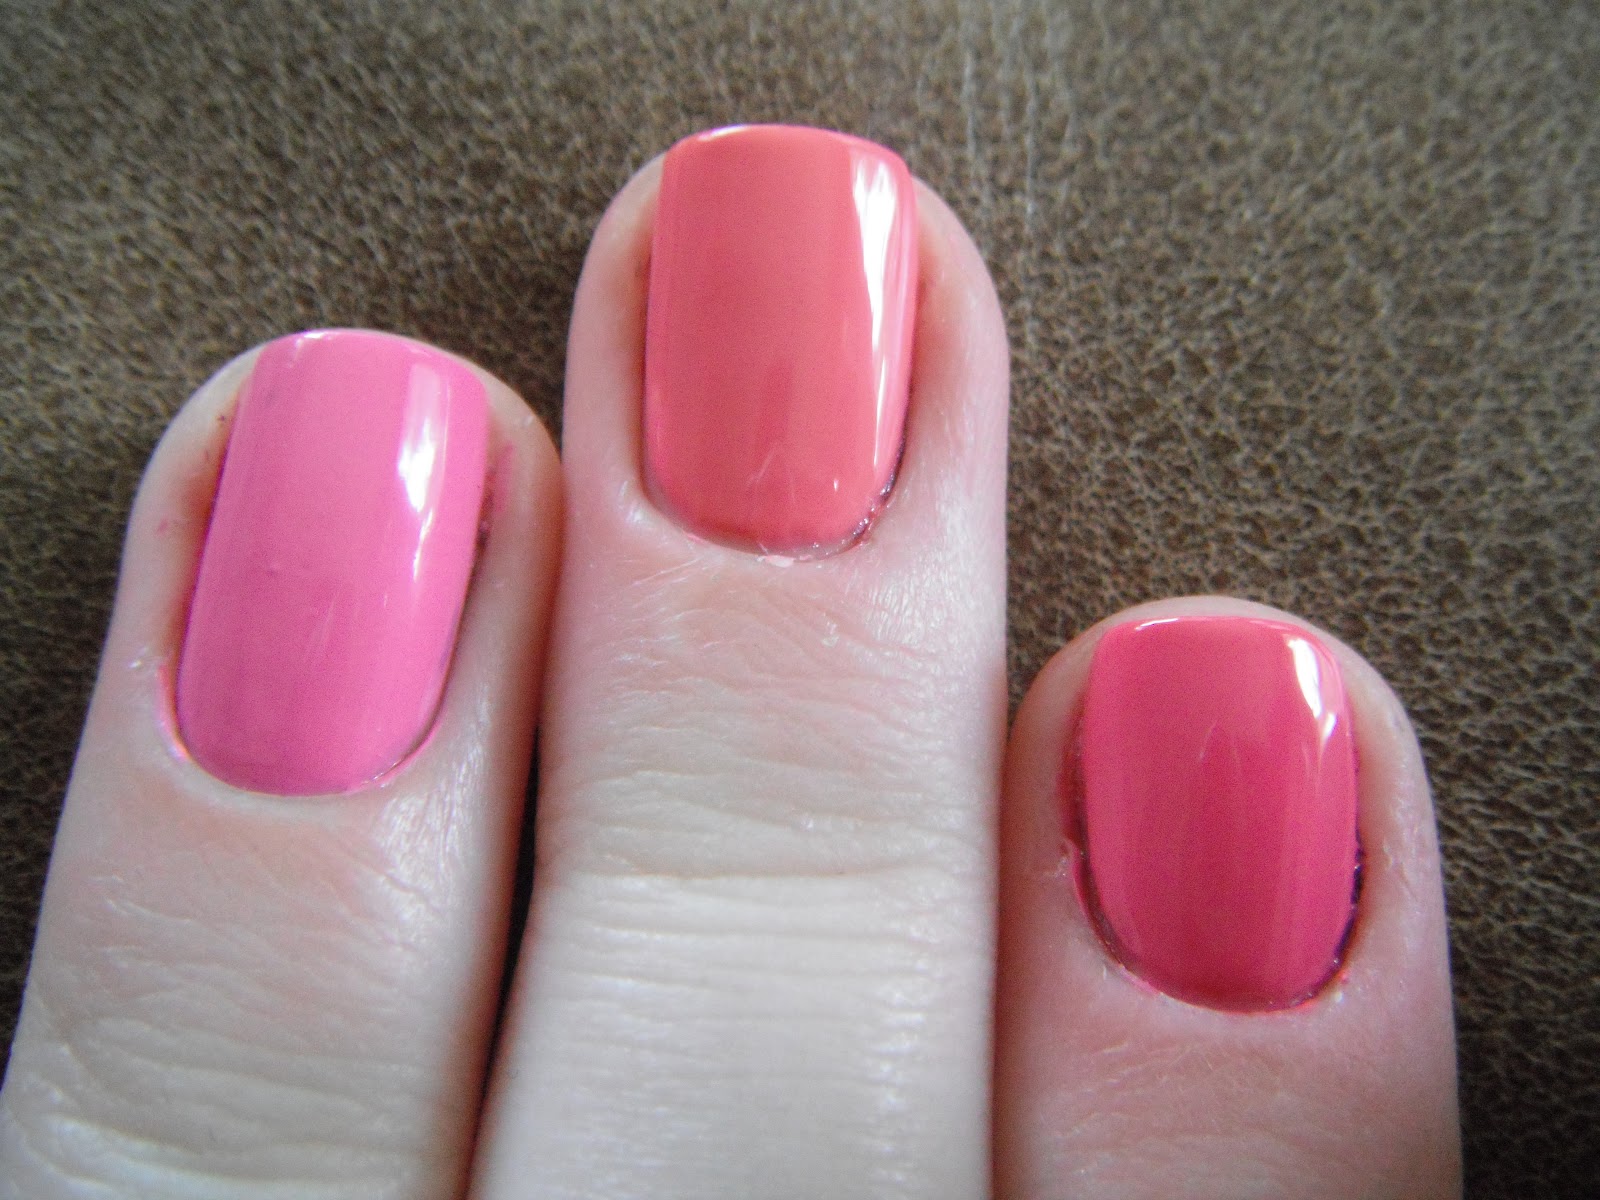 6. OPI Nail Lacquer in "Strawberry Margarita" - wide 4